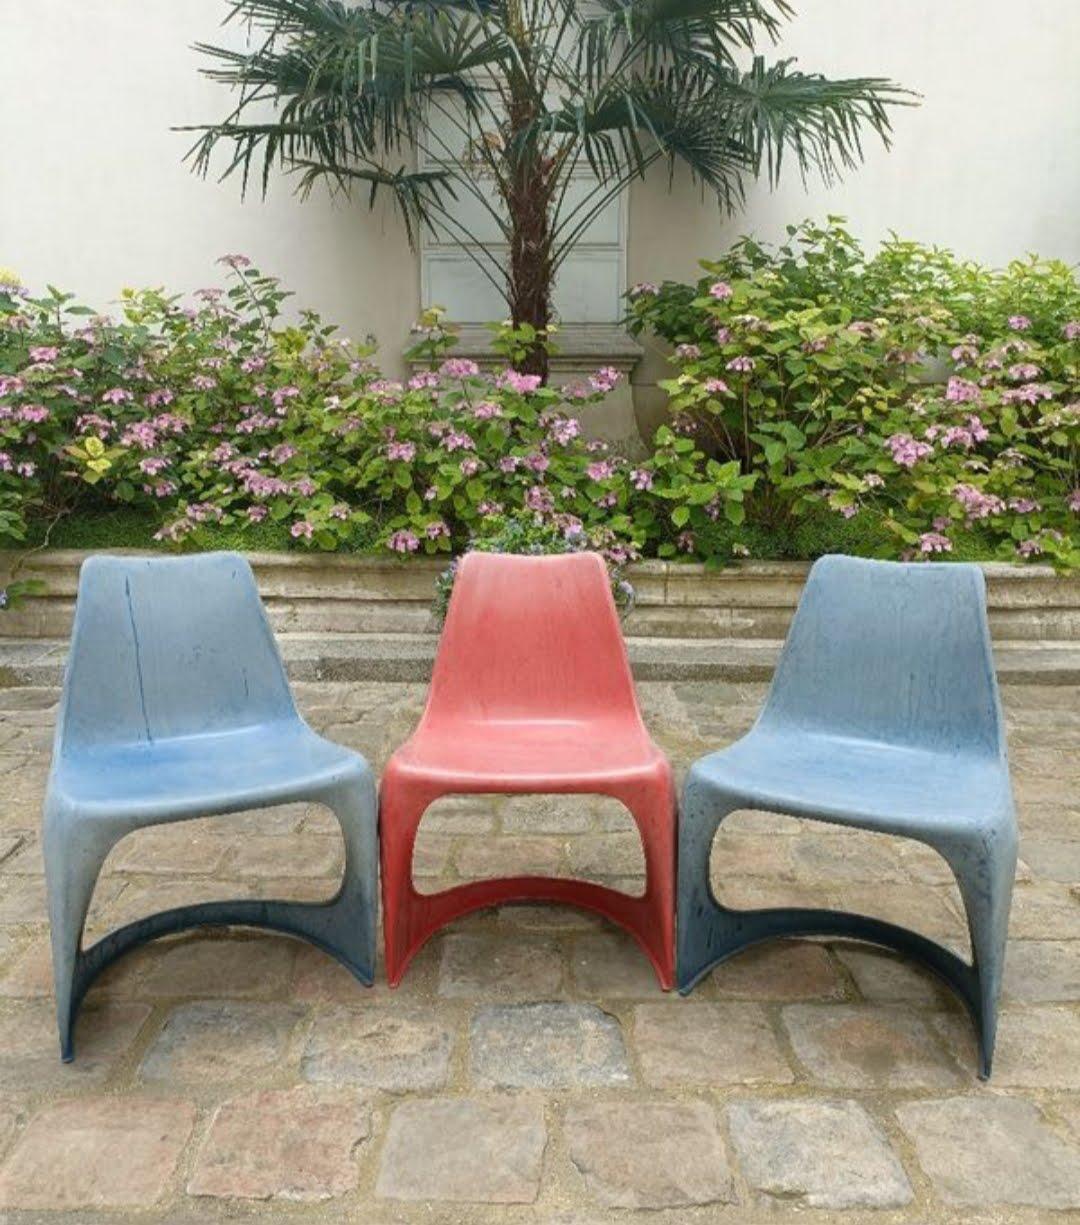 3 vintage chairs by designer Steen Ostergaard (Denmark).
.
Manufacturer Cado - 60s
.
Dimensions: . L 50 cm D 40 cm HD 75 cm HA 45 cm.
.
Superb patinas and rare or even unique in these colors.
.
Belonged to the famous designer Jean Pierre